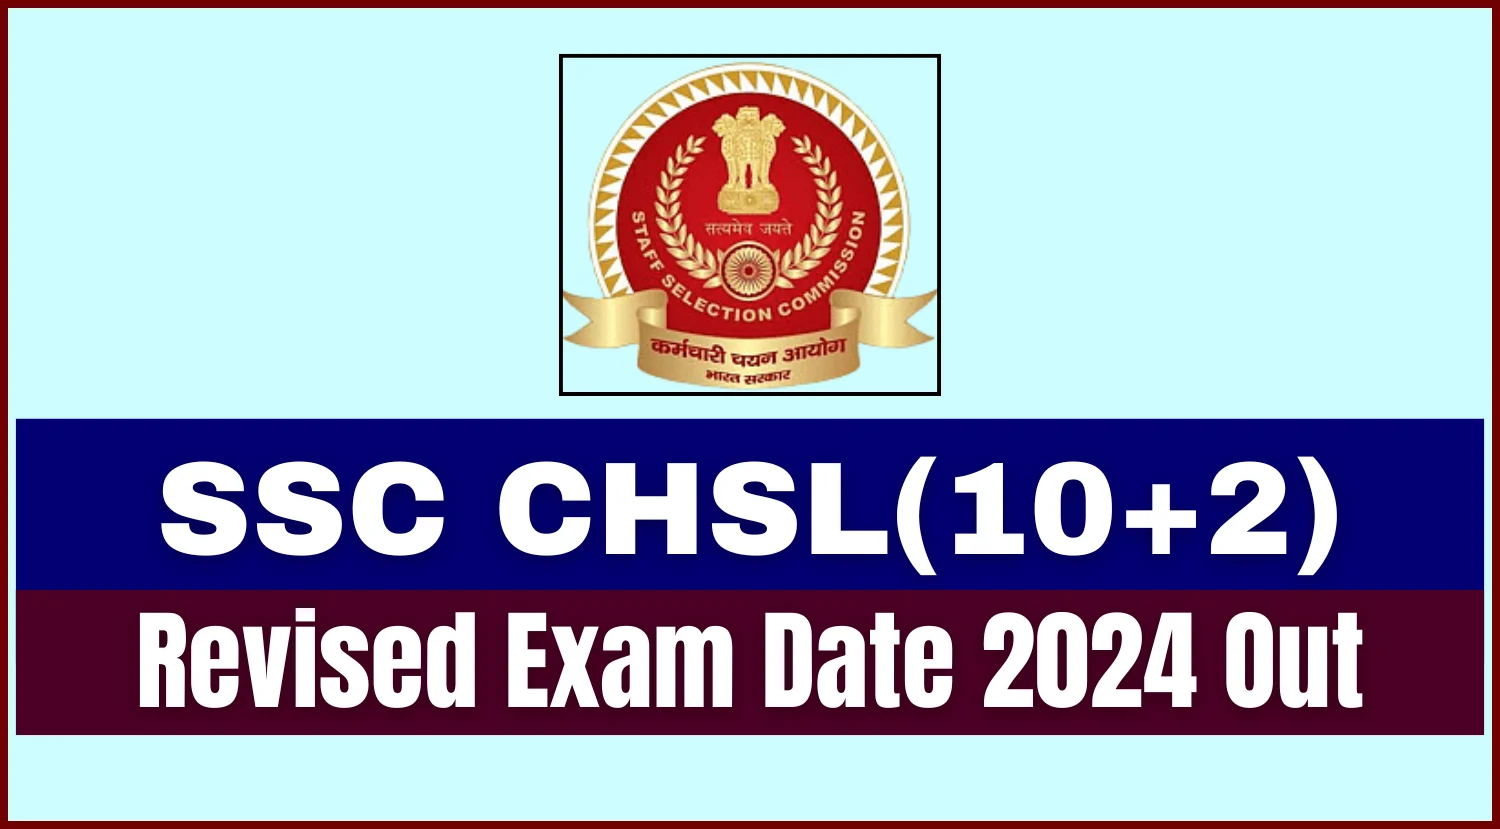 SSC CHSL Exam Date 2024 Out, Check Revised Tier-I Dates Here Now